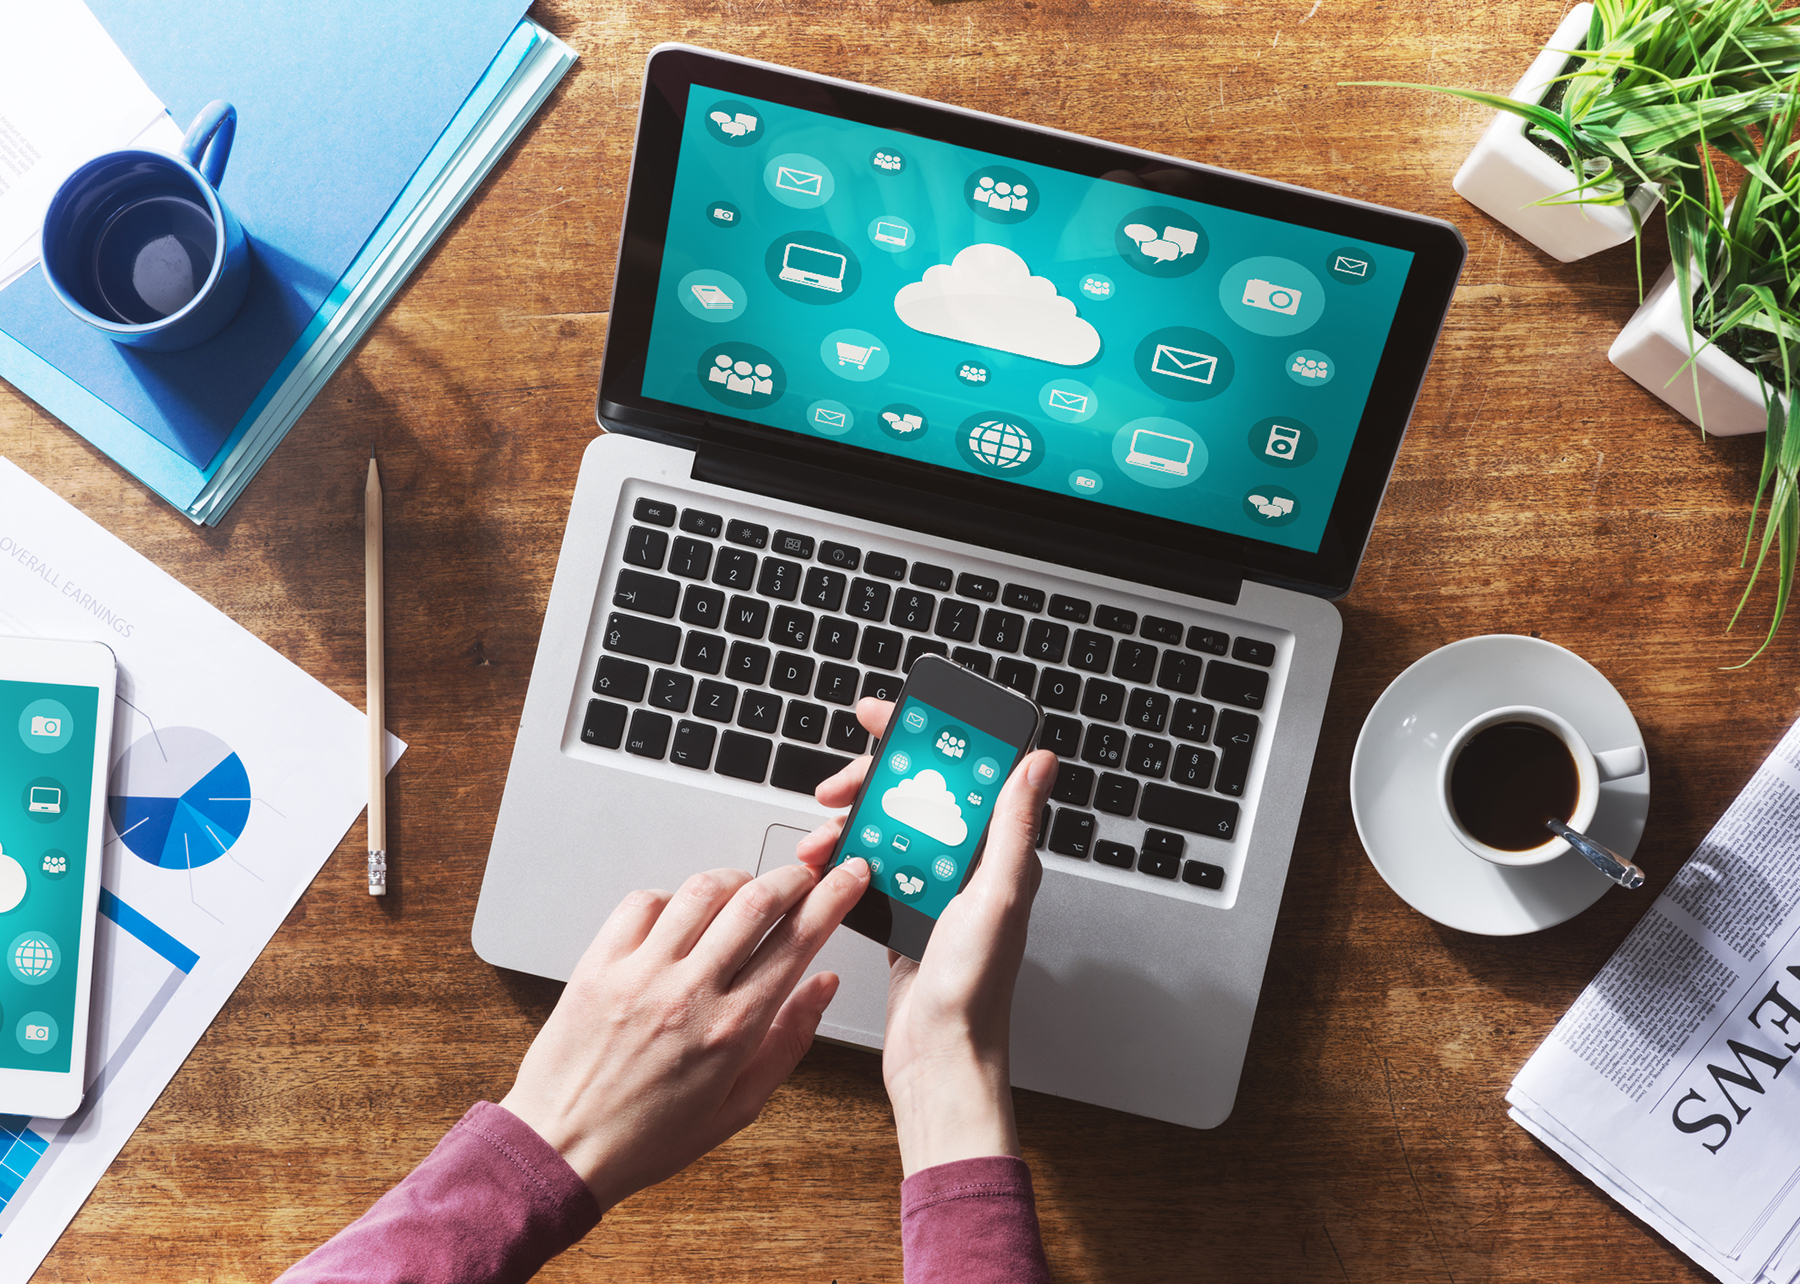 5 Things You Should Know About Cloud Storage